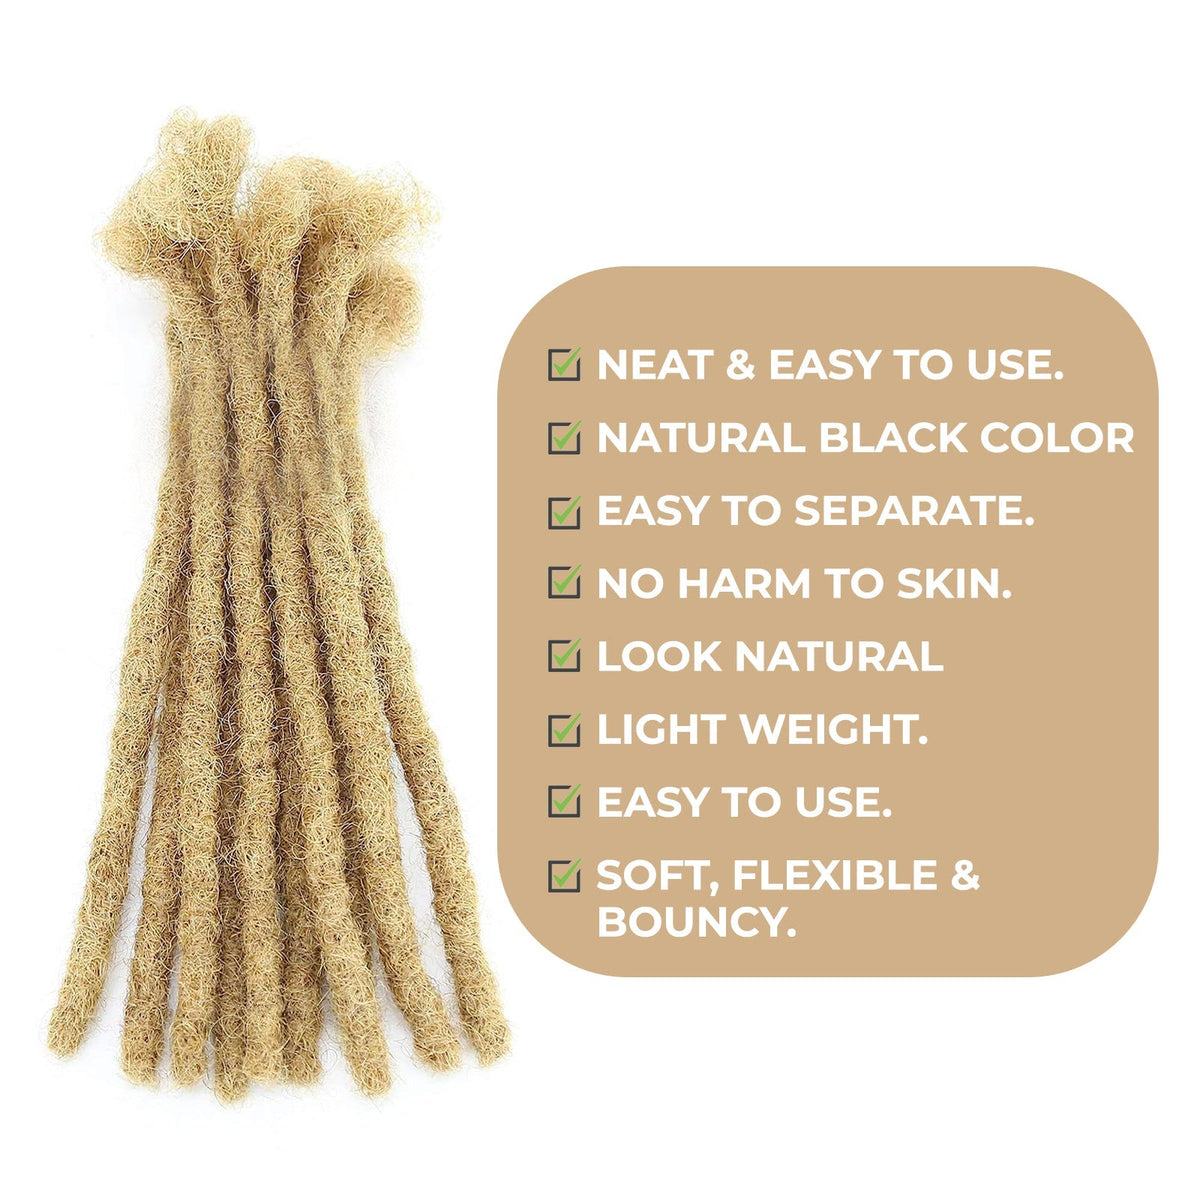 100% Human Hair Blonde Dreadlock Extensions 8Inch 10 Strands Handmade Natural Loc Extensions Human Hair Bundle Dreads Extensions For Woman & Men Can be Dyed (27/Honey Blonde 8inch length 0.8cm Width)